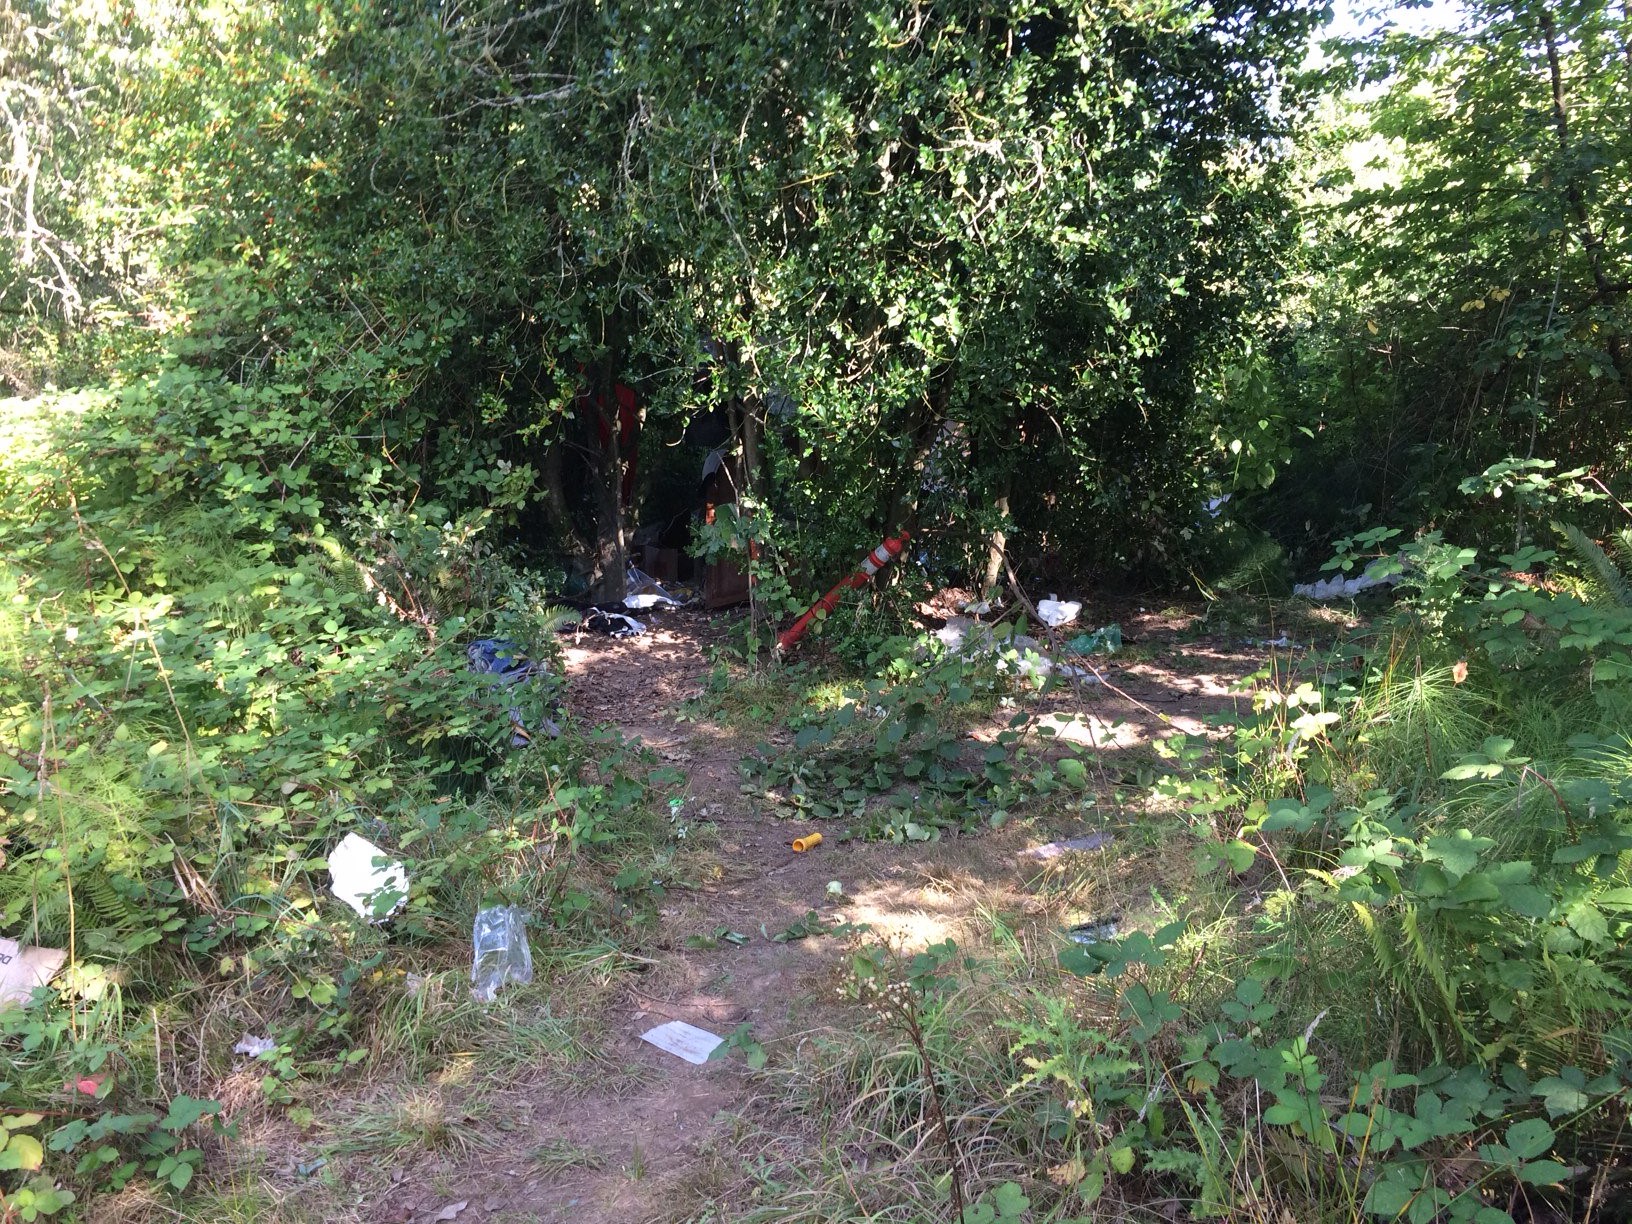 A passer-by found a dead body Thursday afternoon in this wooded area in Hazel Dell, and detectives with the Clark County Sheriff's Office were investigating. Additional identifying information wasn't available, and the sheriff's office said it wasn't immediately obvious what caused the person's death.